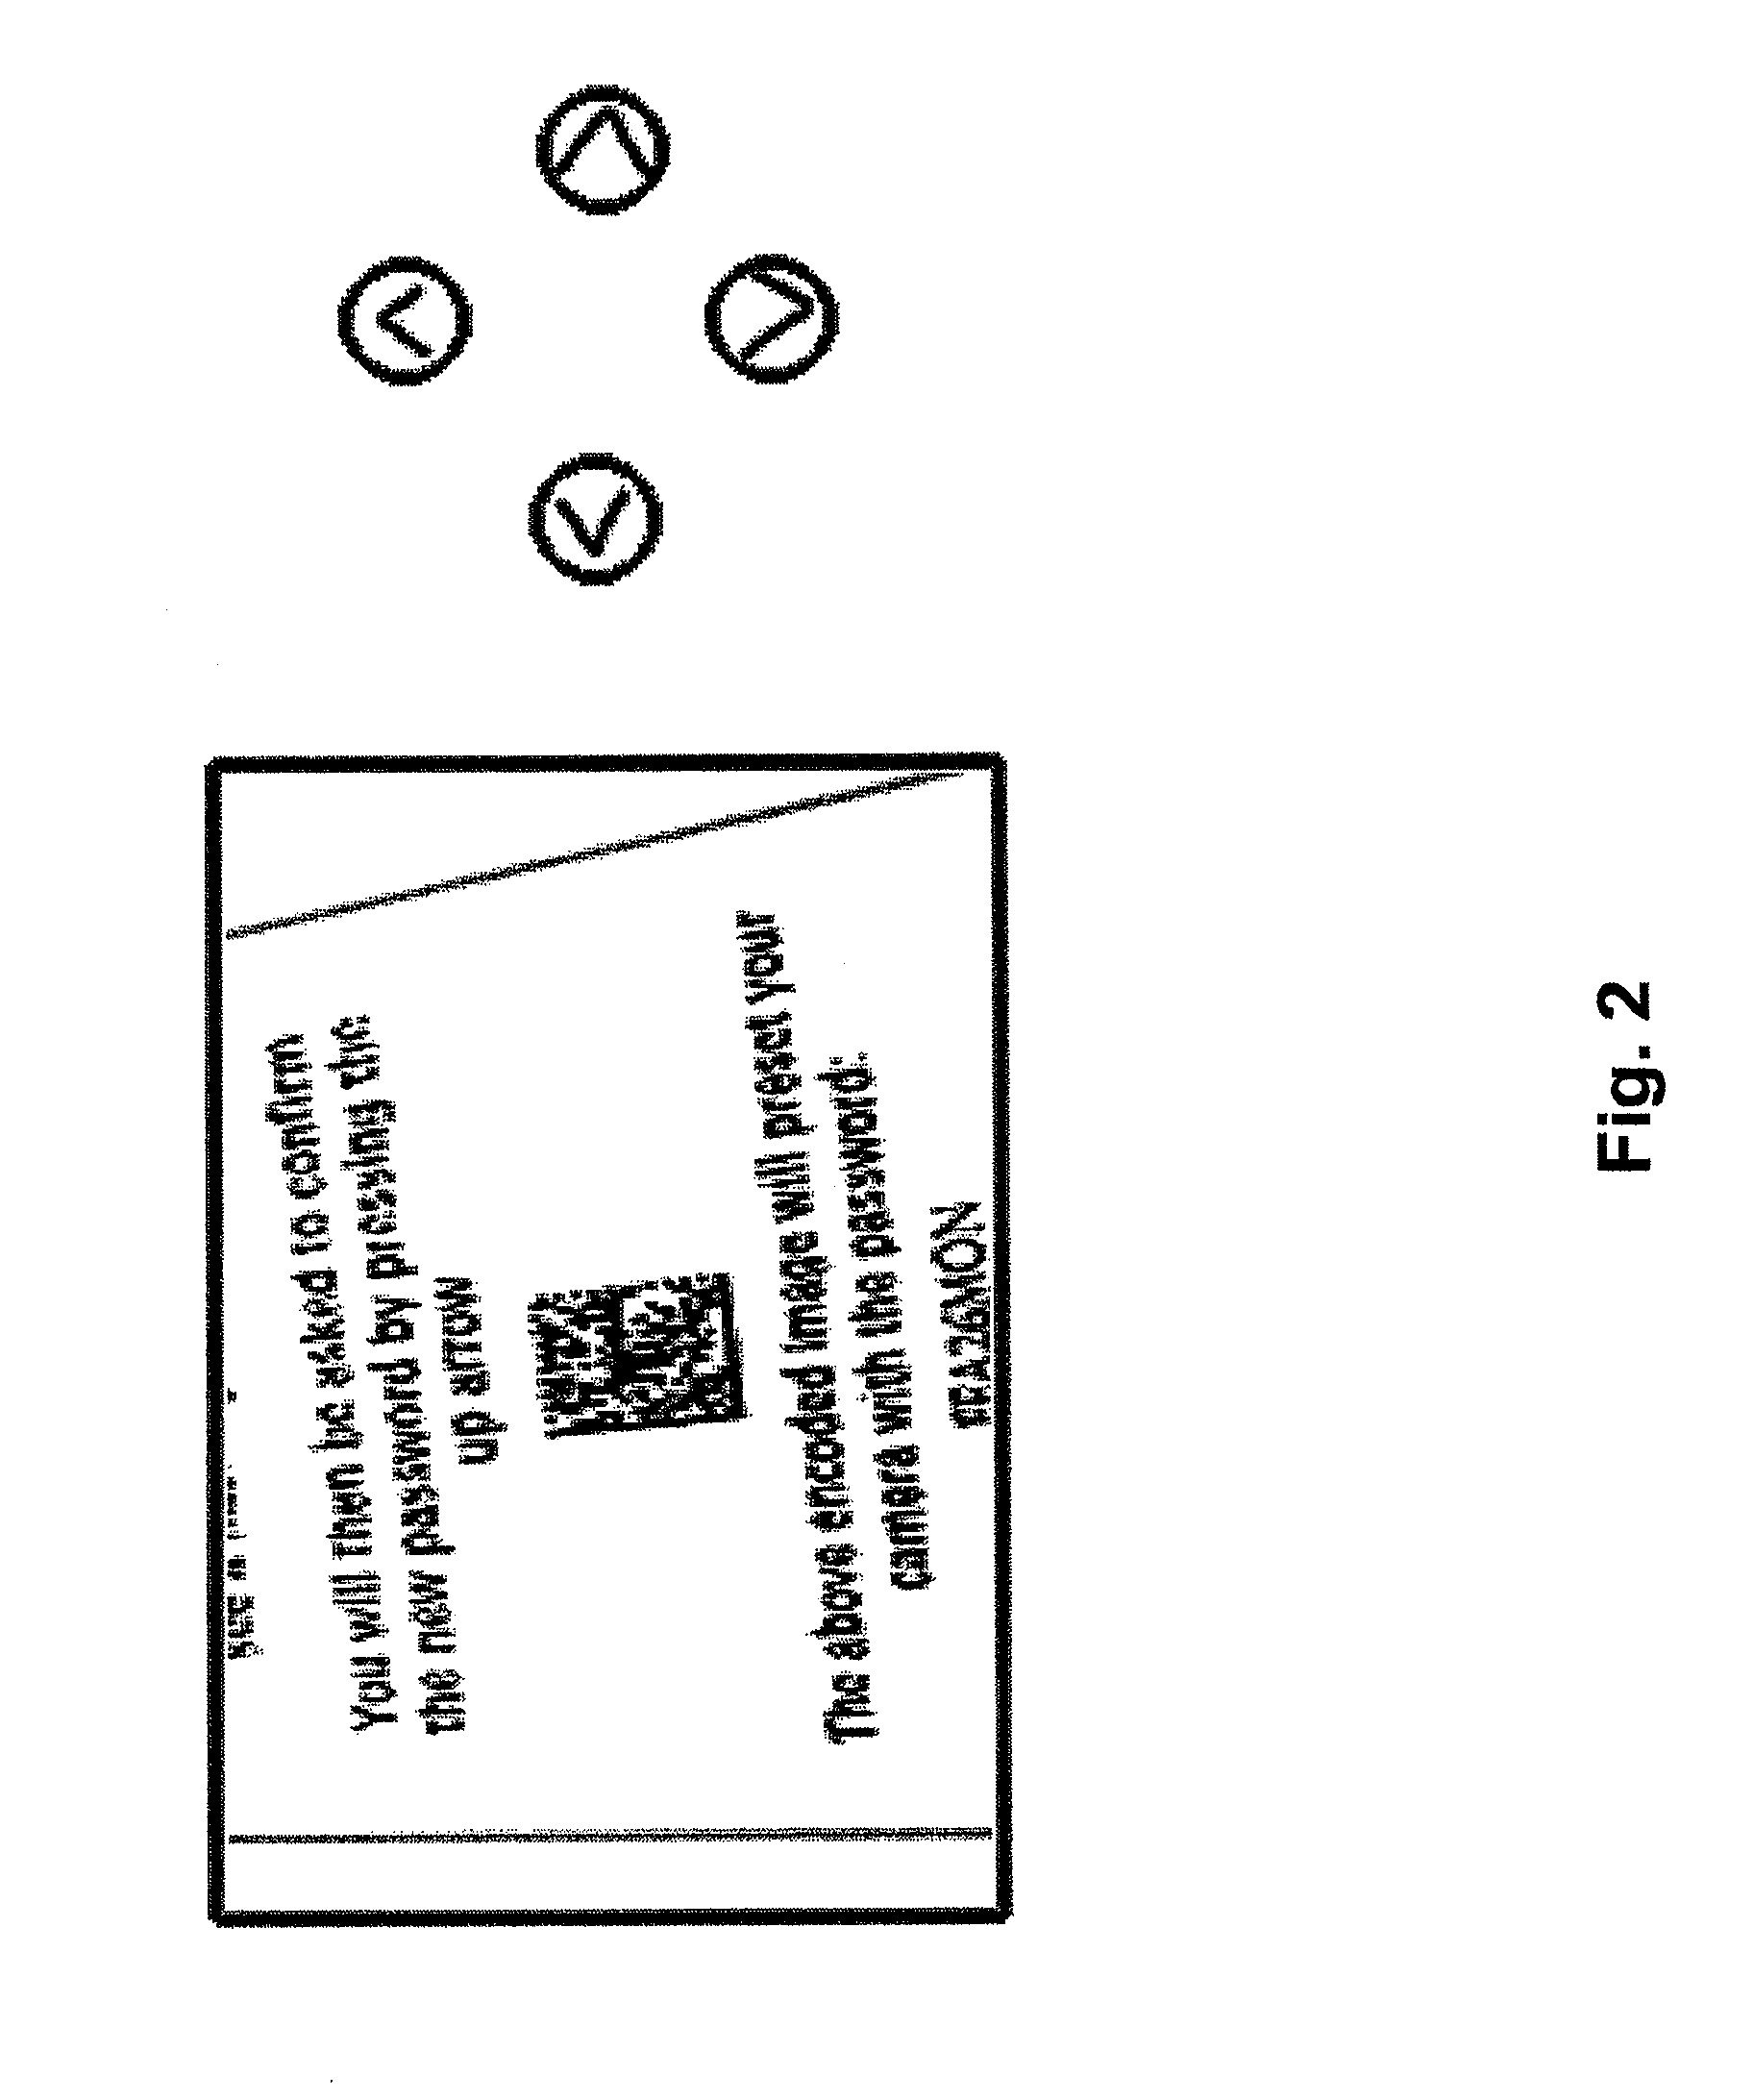 Method for configuring camera-equipped electronic devices using an encoded mark